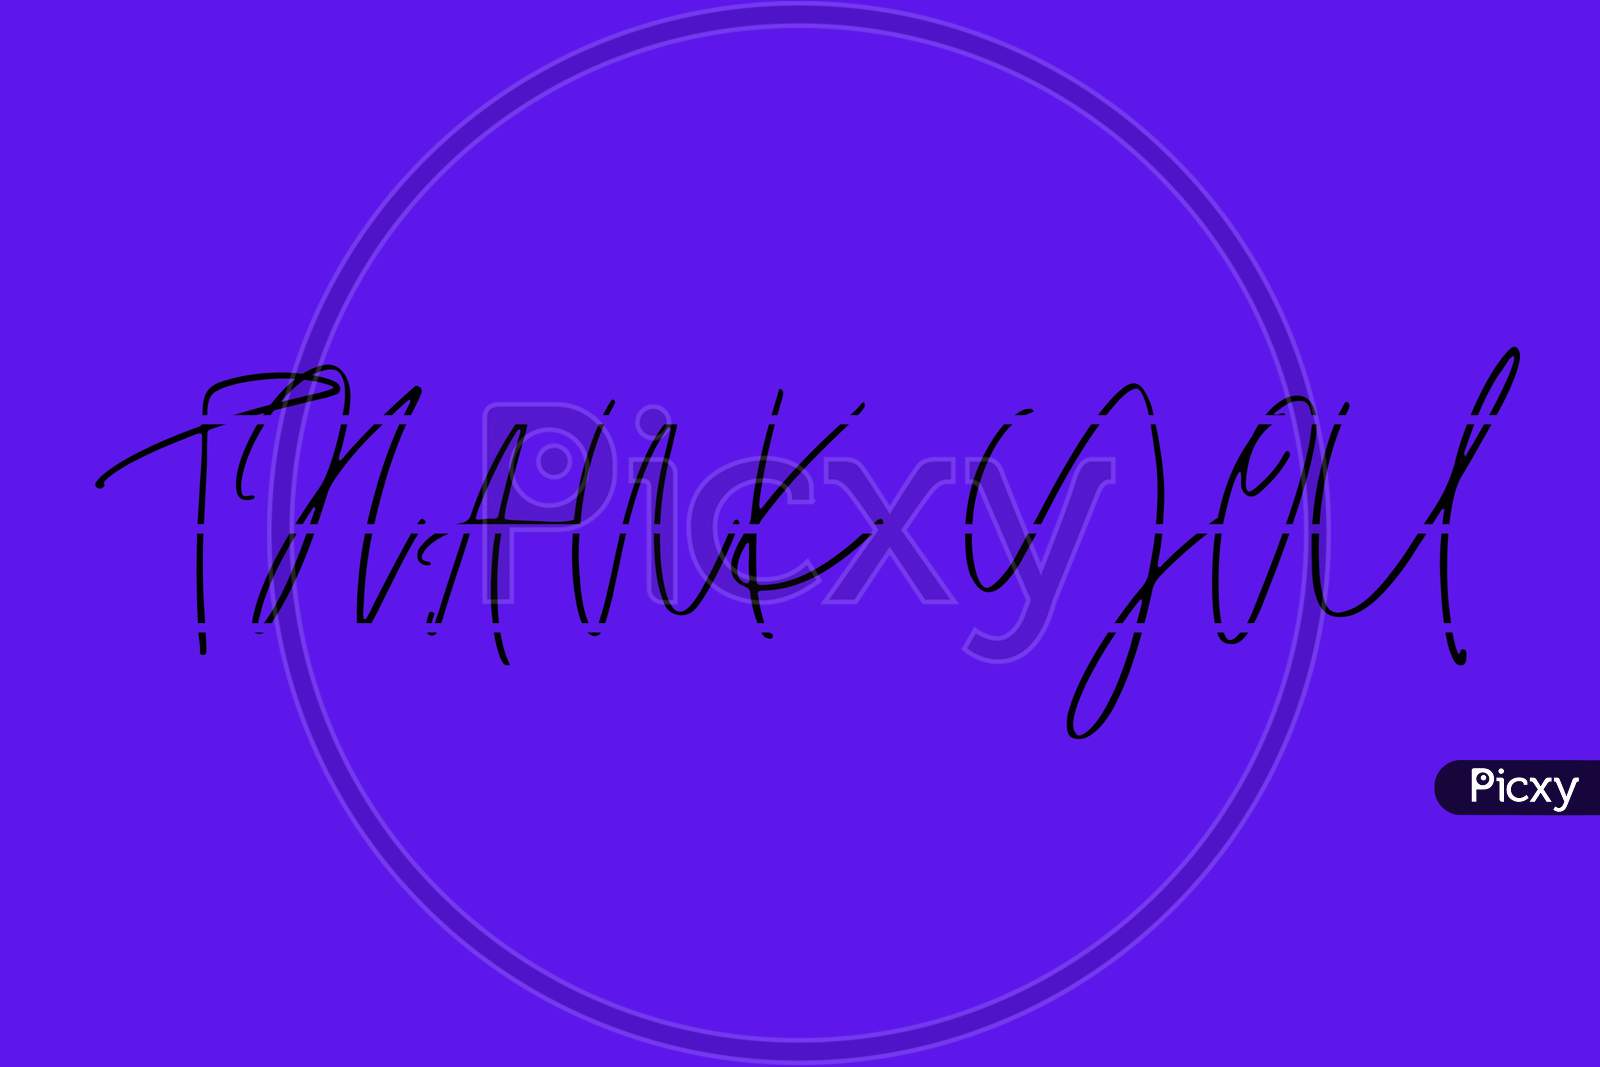 Thank You Poster With Spectrum Brush Strokes With Voilet Background